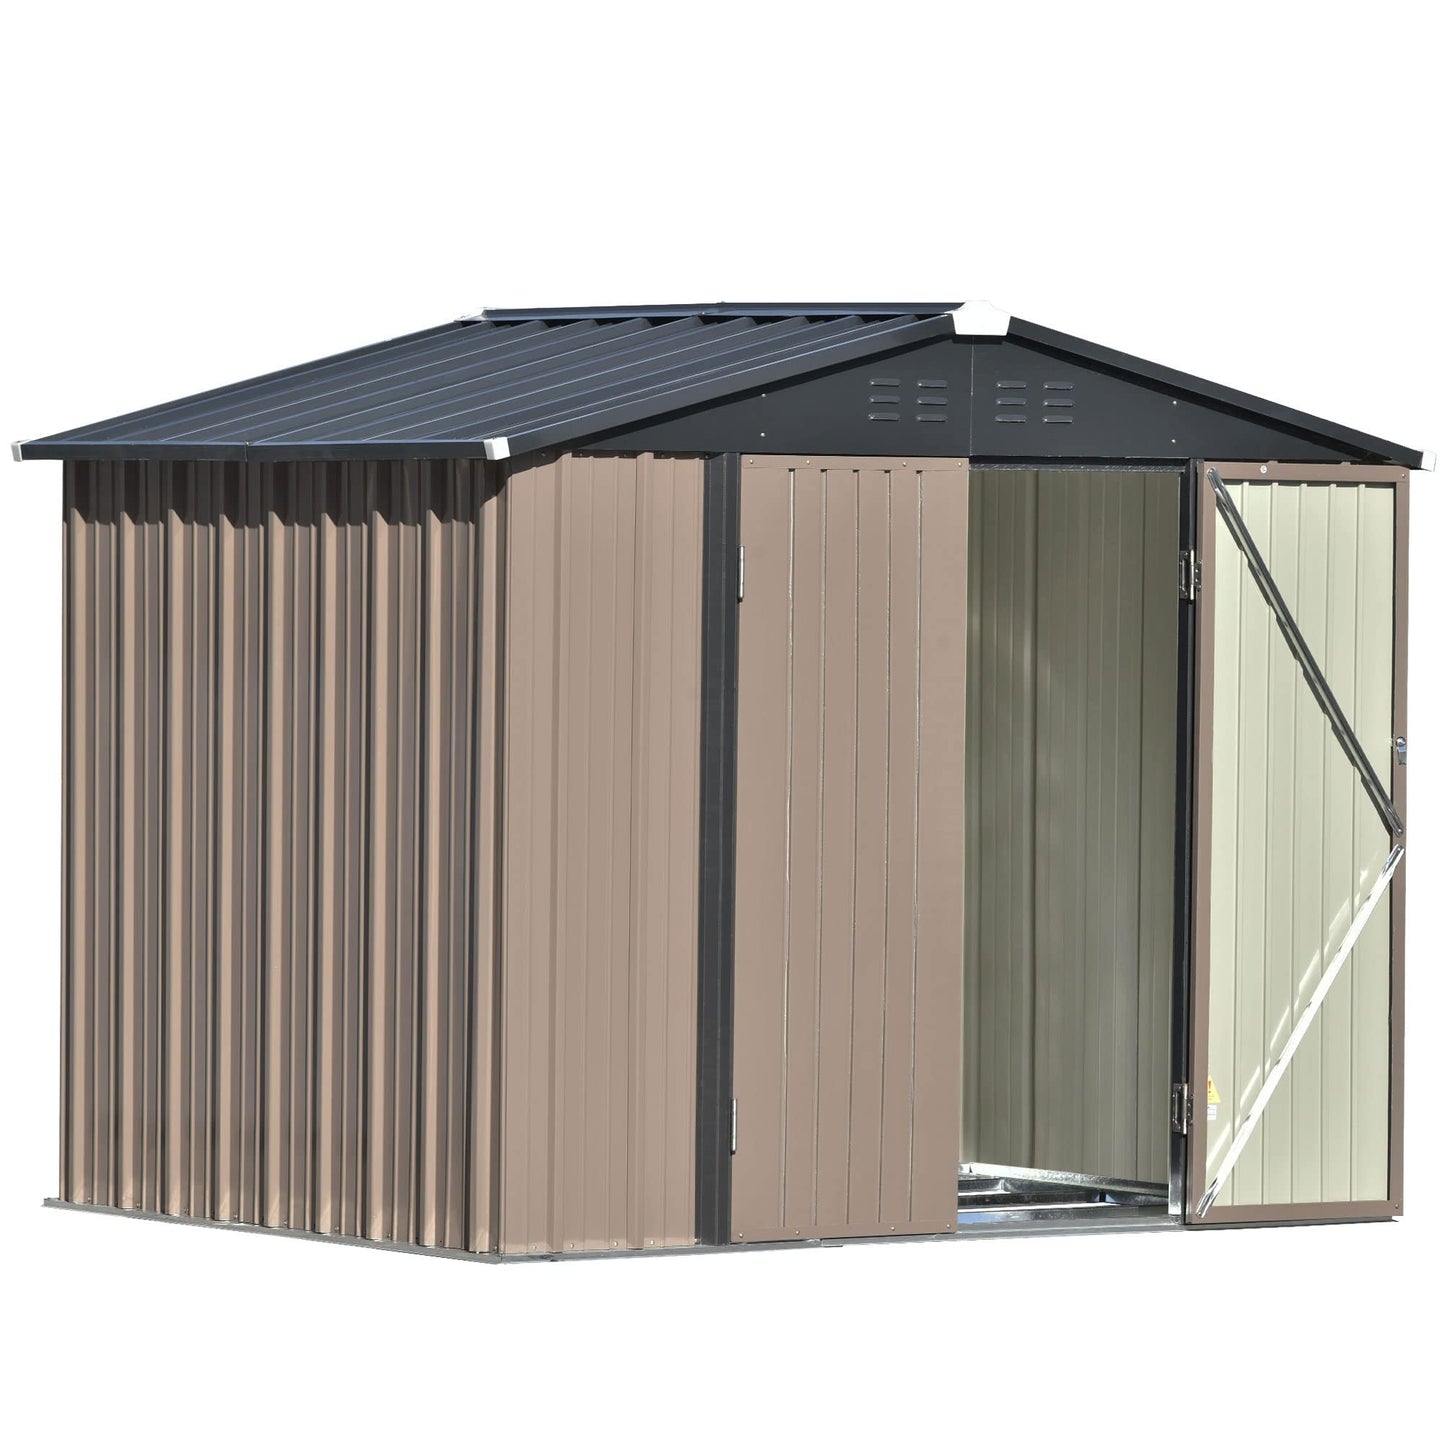 UBGO Metal Storage Shed Organizer, Garden Tool House,Patio 8x6ft Bike Shed Garden Shed, Storage Shed with Lockable Doors,Tool Cabinet with Vents and Foundation Frame for Backyard,Lawn,Garden,Brown 6x8 FT Metal Storage Shed Brown-2